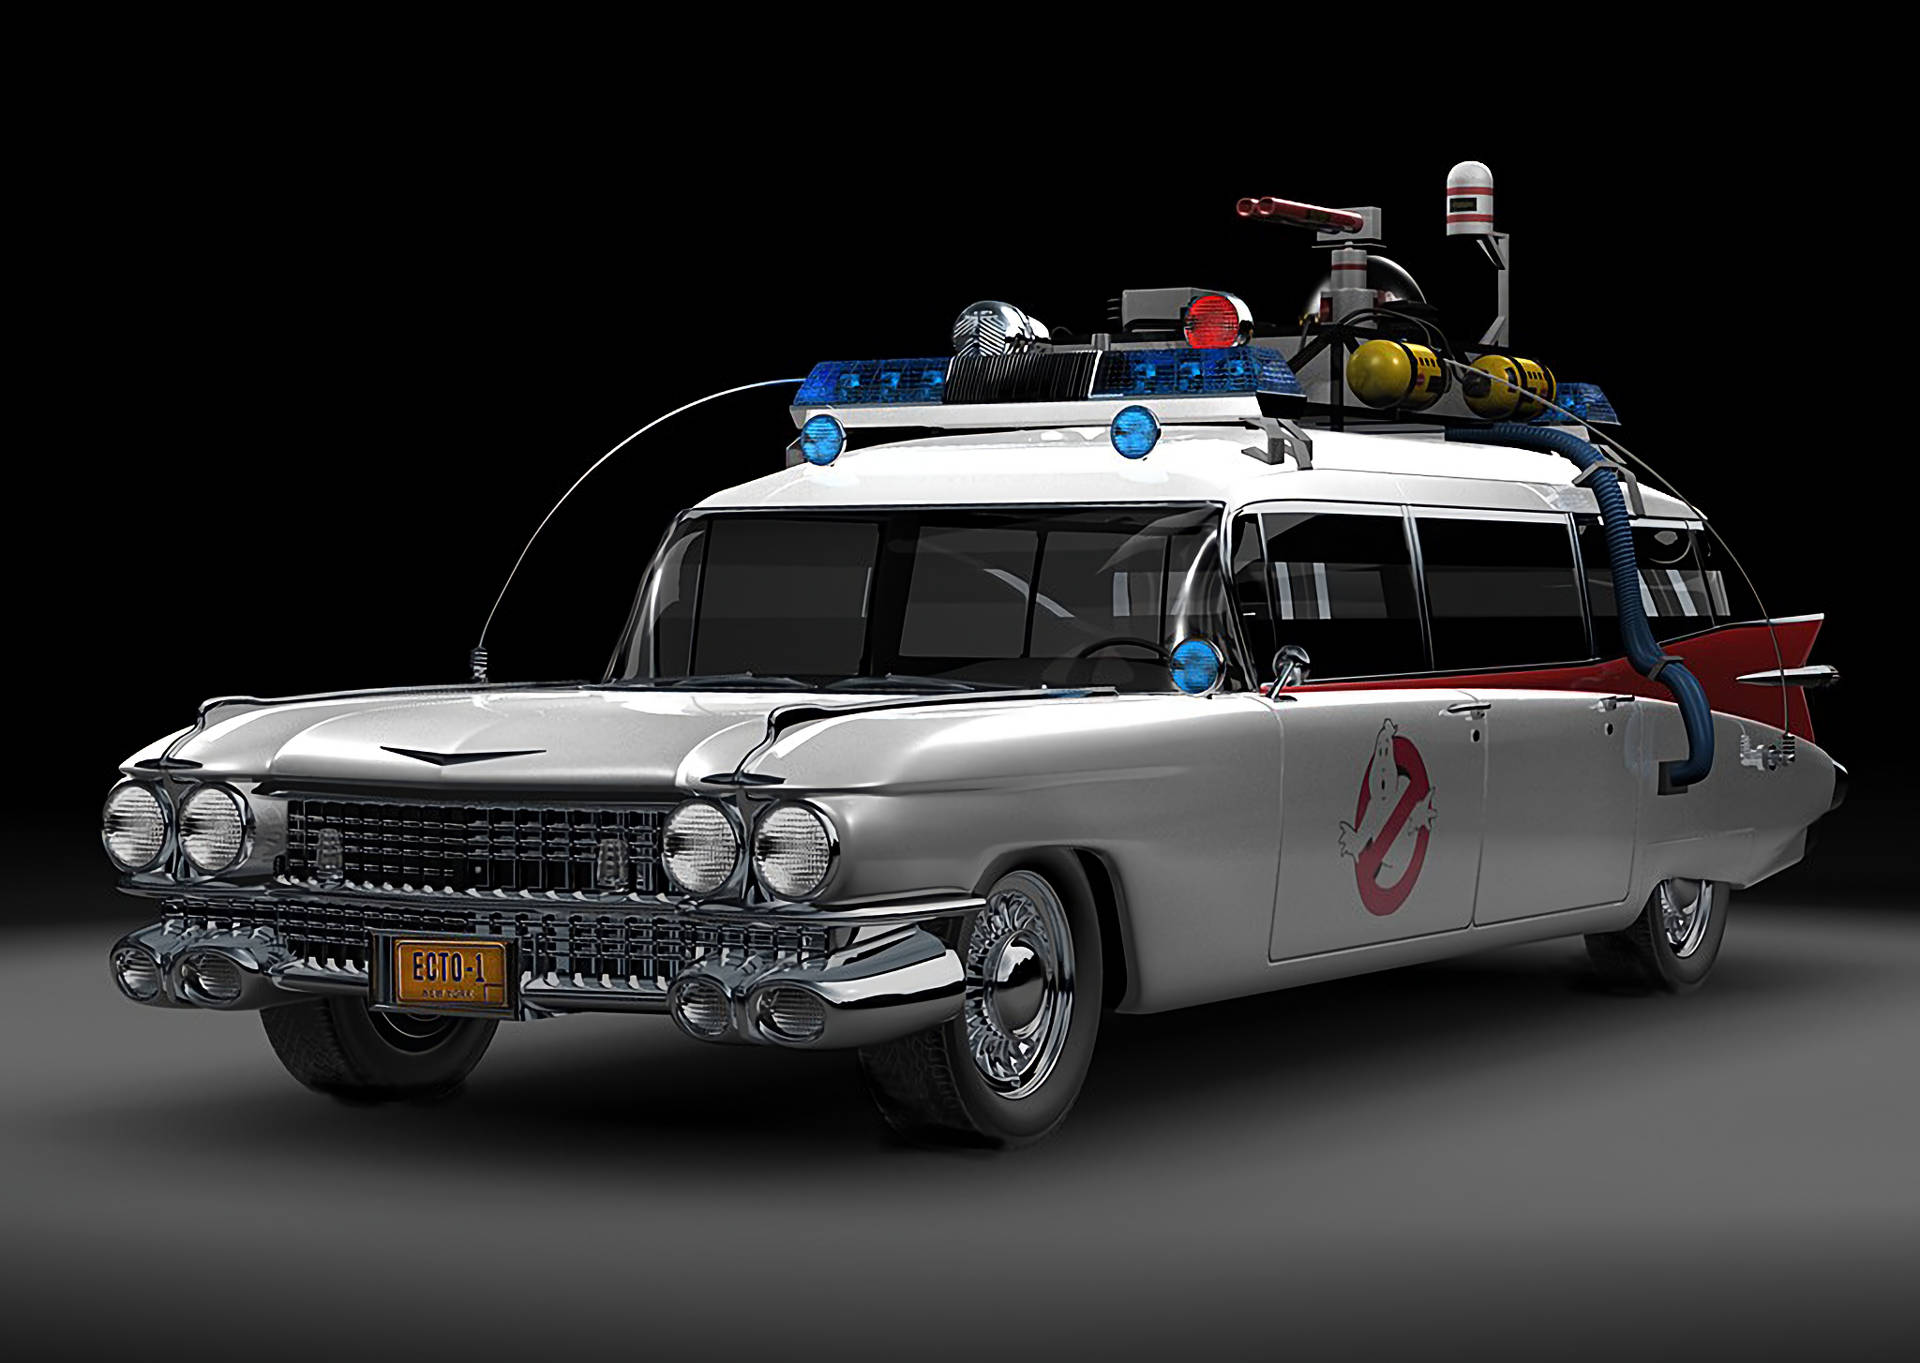 Get a load of the iconic Ghostbusters' Ecto-1 car Wallpaper